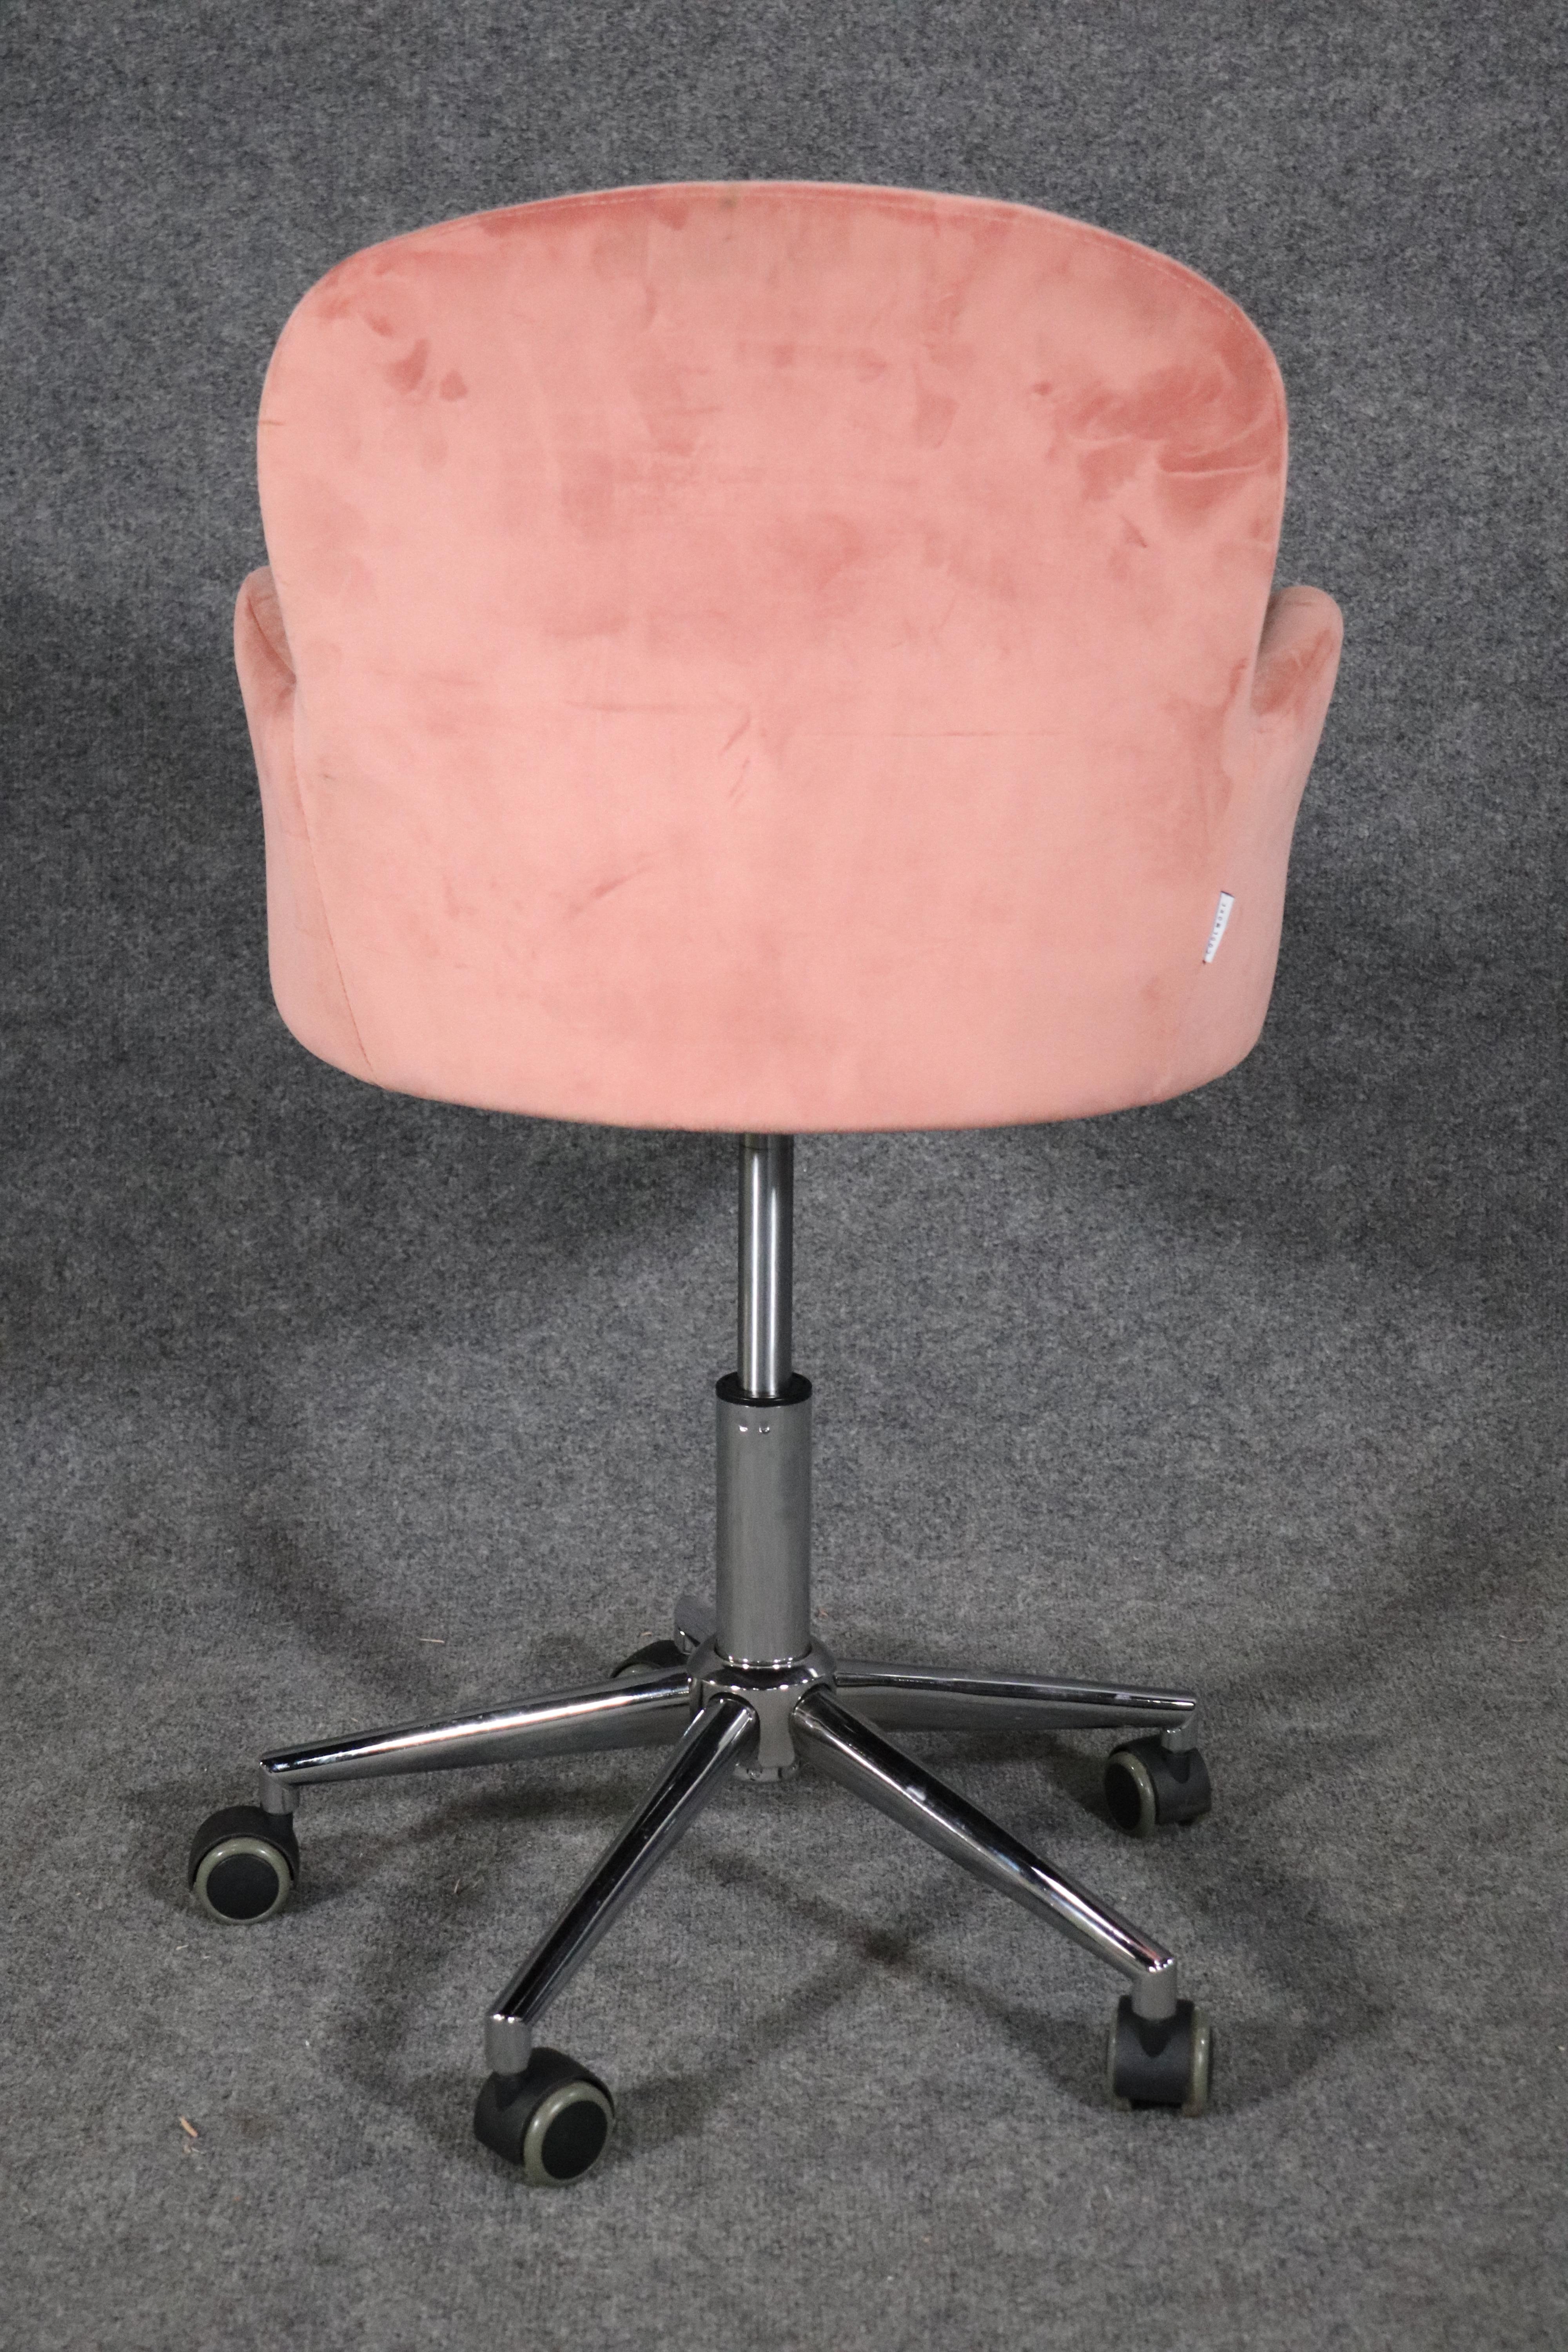 Adjustable Desk Chair In Good Condition For Sale In Brooklyn, NY